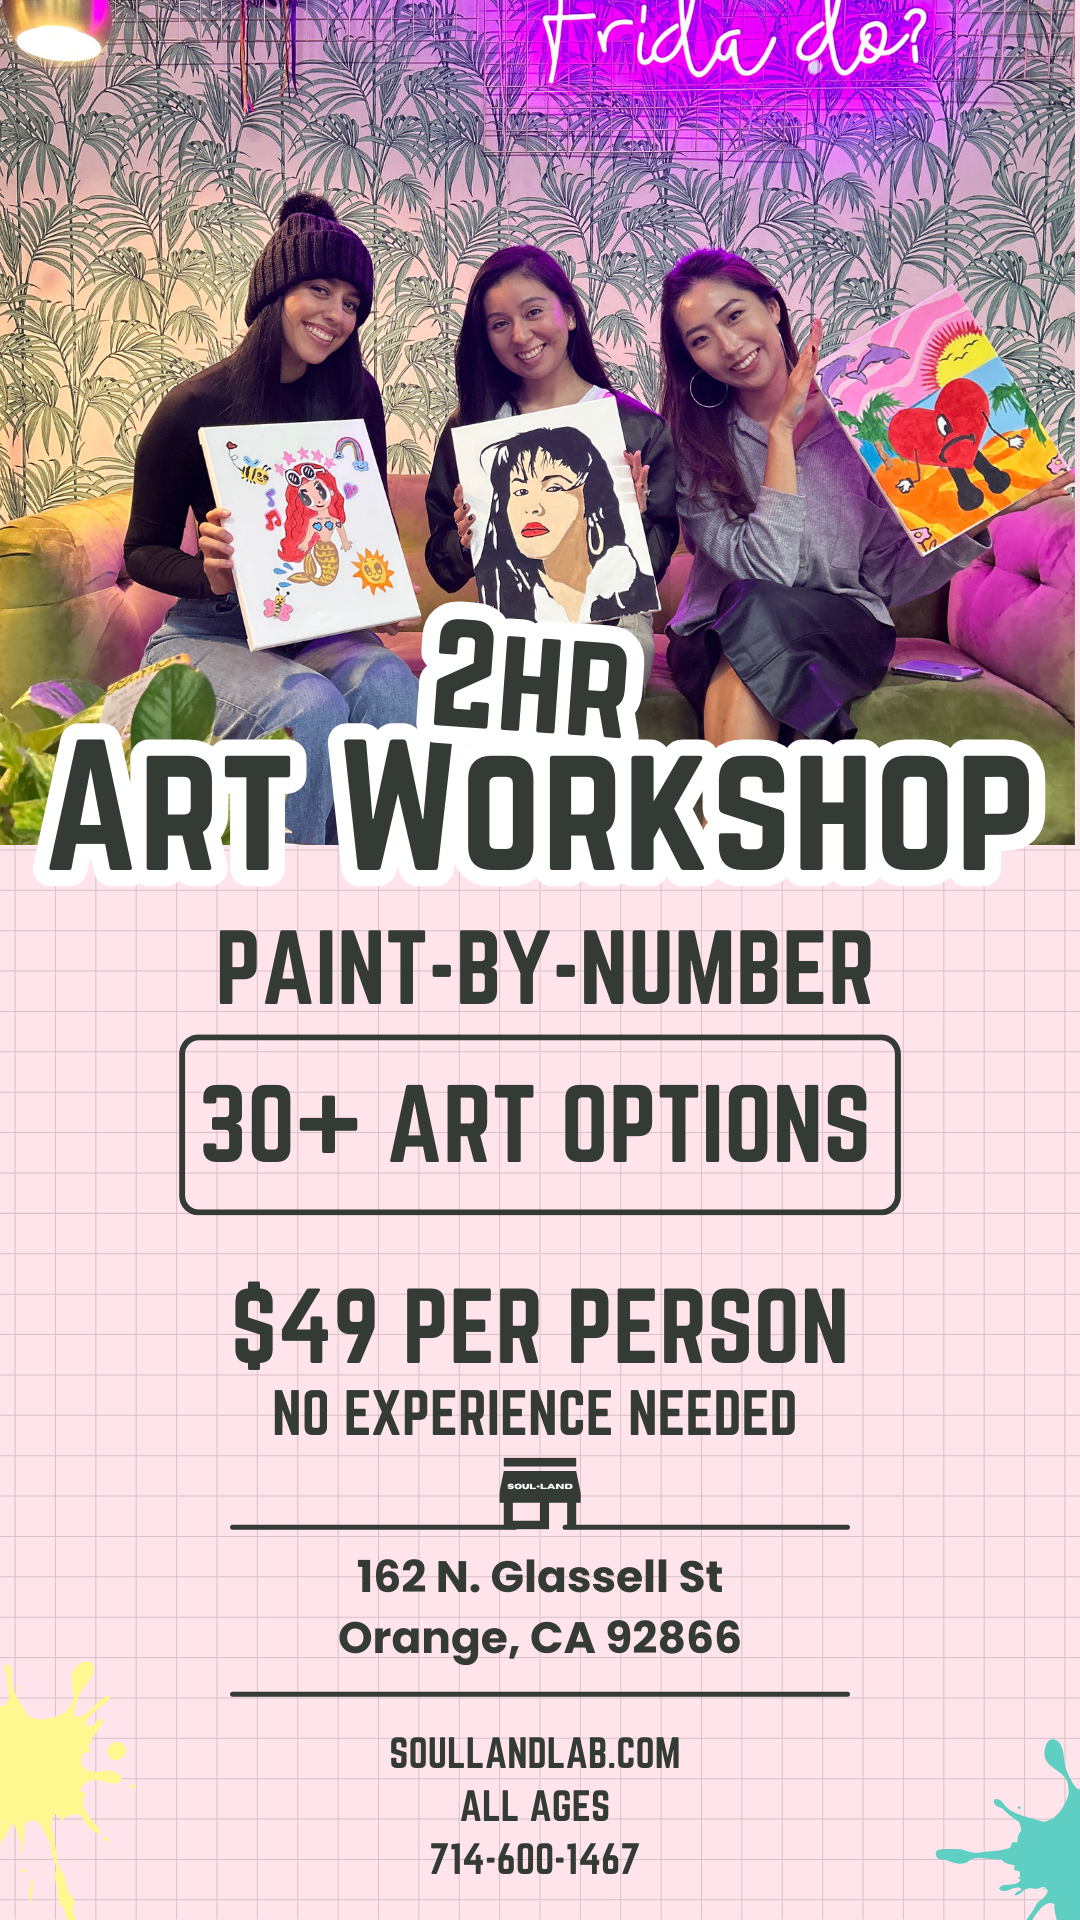 Paint-By-Number Workshop